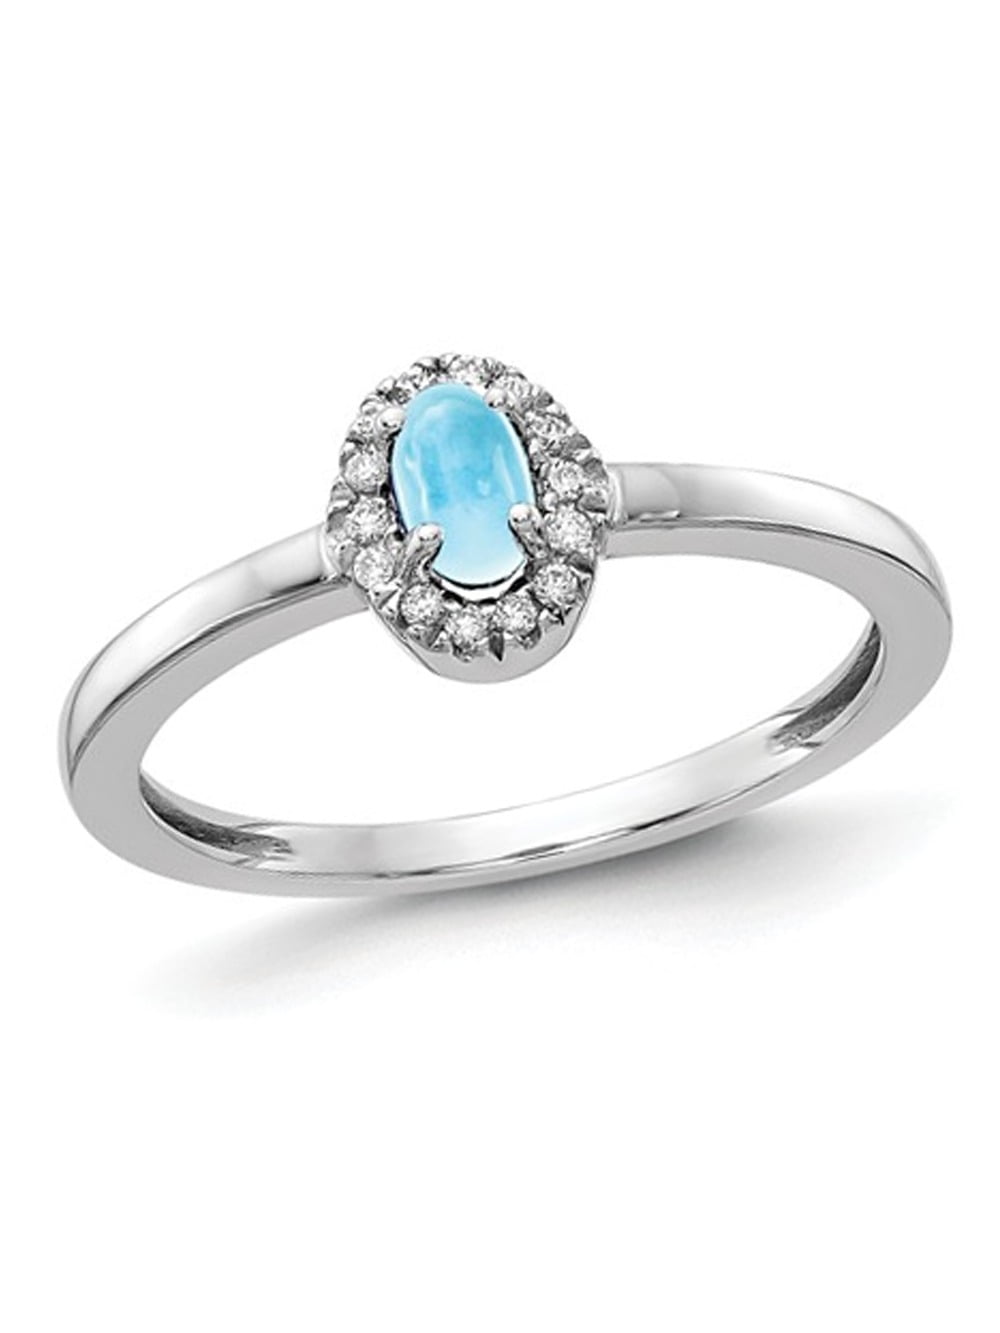 Gem's Ballet 3.47Ct Oval Natural Sky Blue Topaz Mystic Quartz Wedding Ring  925 Sterling Silver Mona Lisa Rings for Women Jewelry - AliExpress